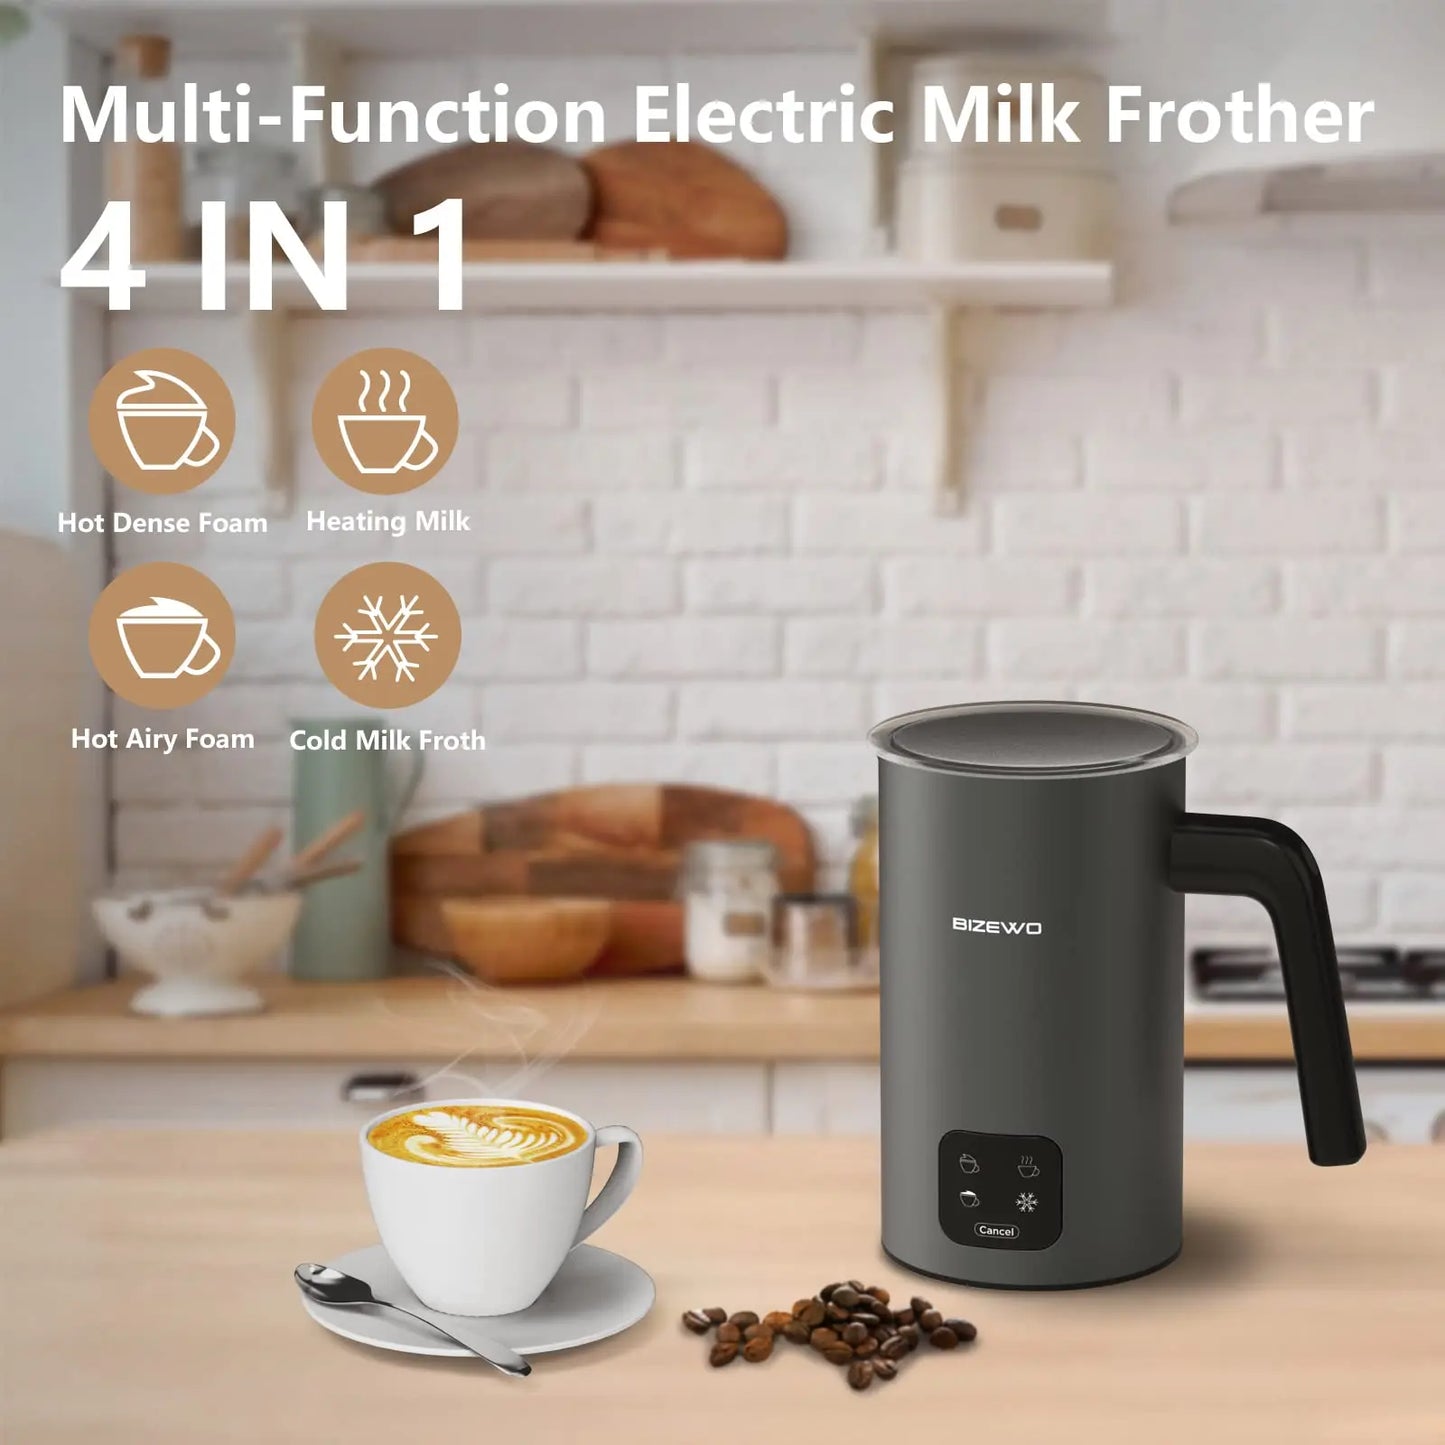 https://bizewohome.com/cdn/shop/files/Frother-for-Coffee_-Milk-Frother_-4-IN-1-Automatic-Warm-and-Cold-Milk-Foamer_-BIZEWO-Stainless-Steel-Milk-Steamer-for-Latte_-Cappuccinos_-Macchiato_-Hot-Chocolate-Milk-with-LED-Touch_327b353e-0027-4602-ab3a-c2b1be9f47c1_1445x.jpg?v=1690162788